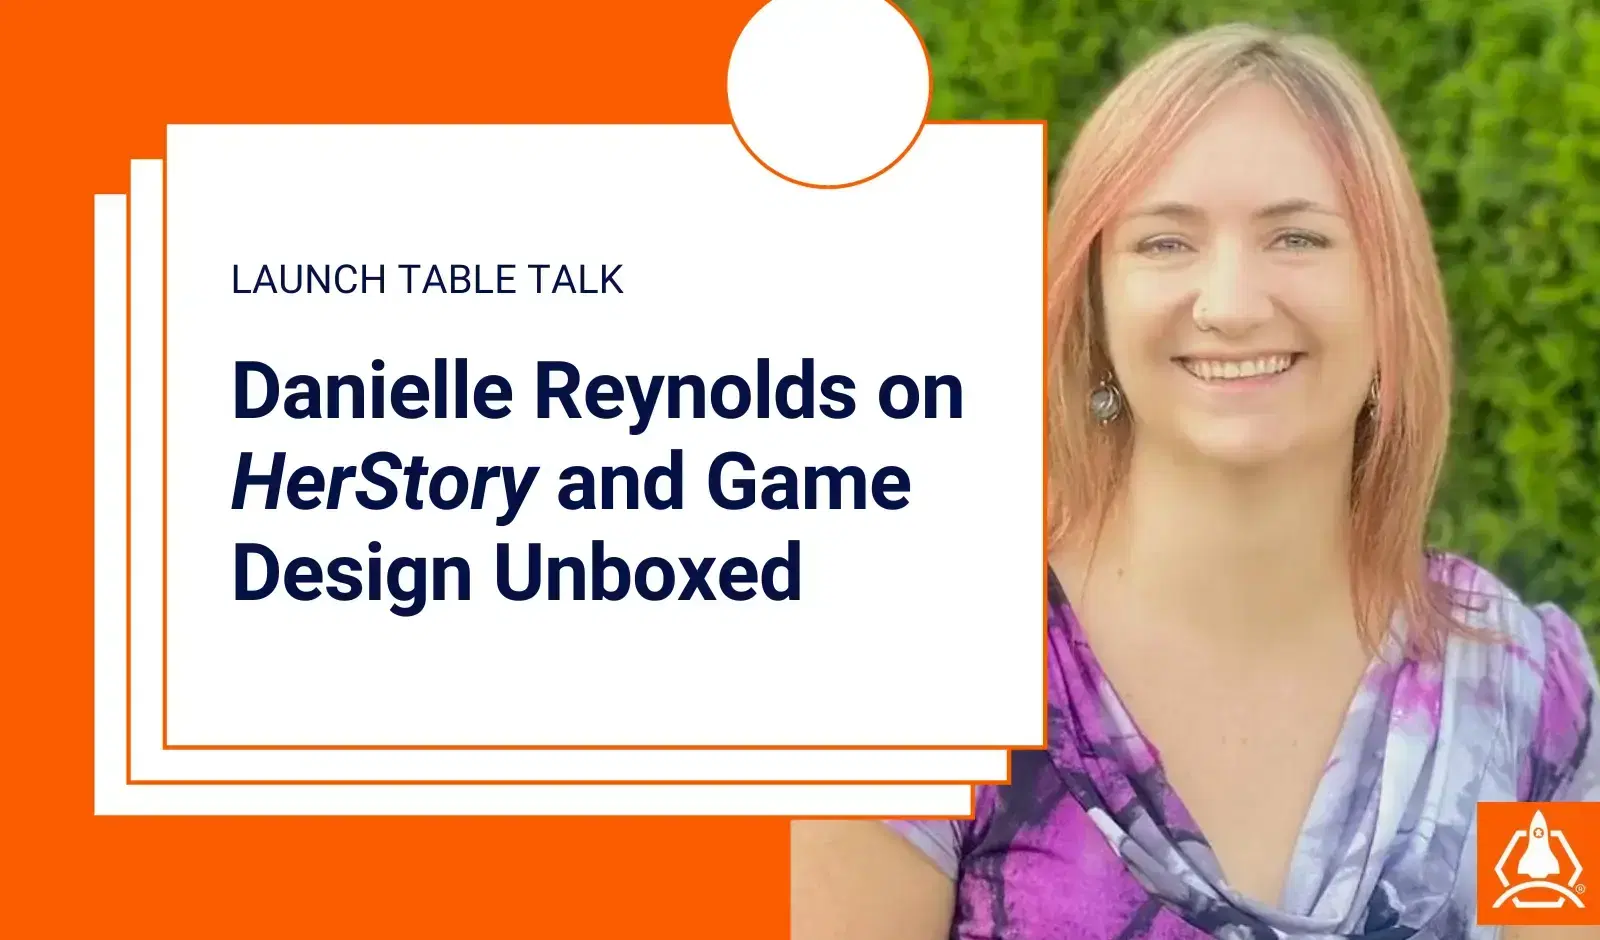 Danielle Reynolds is the host of Game Design Unboxed and designer of HerStory